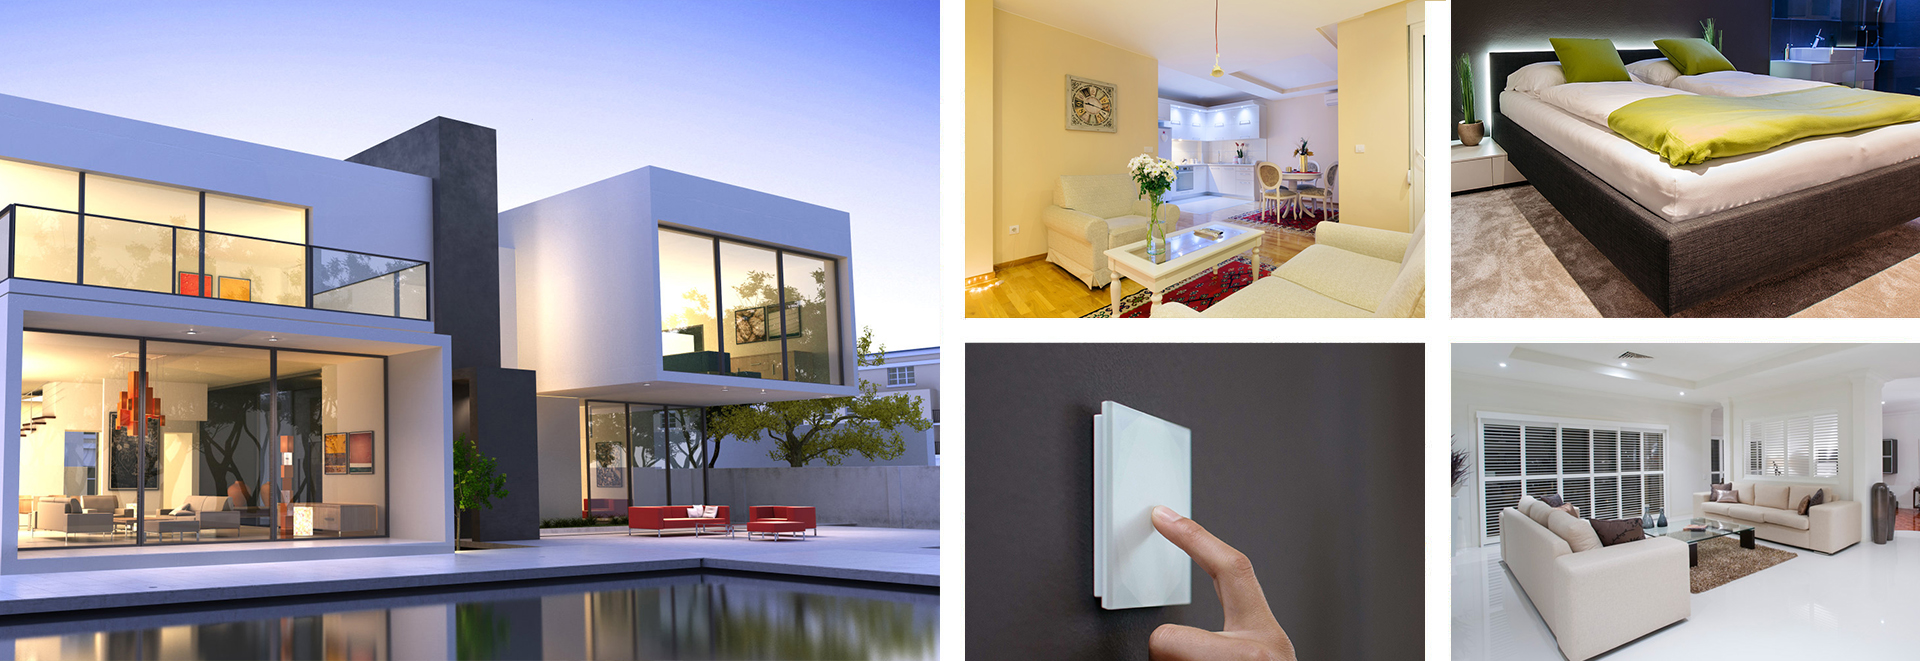 Smarthome Nord Loxone Real Smart Home Selent Collage